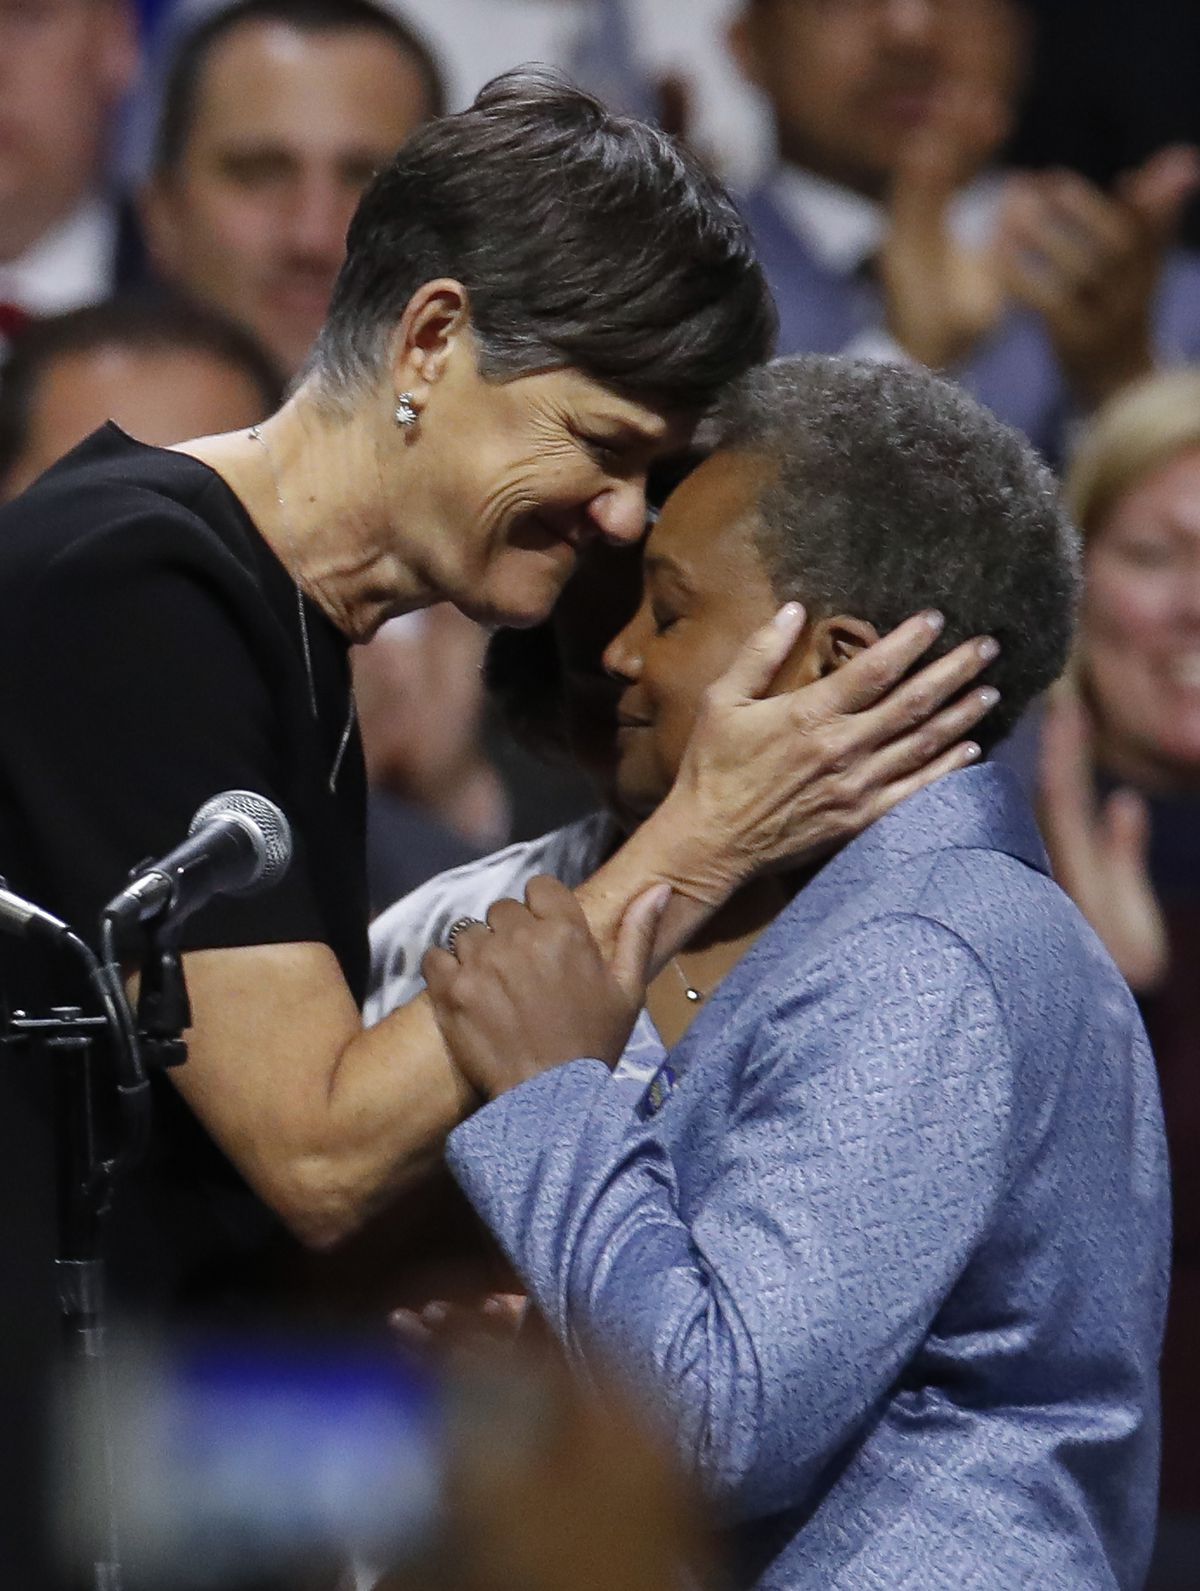 Mayor Lori Lightfoot embraces her wife Amy Eshleman at the mayor’s inauguration ceremony on May 20.